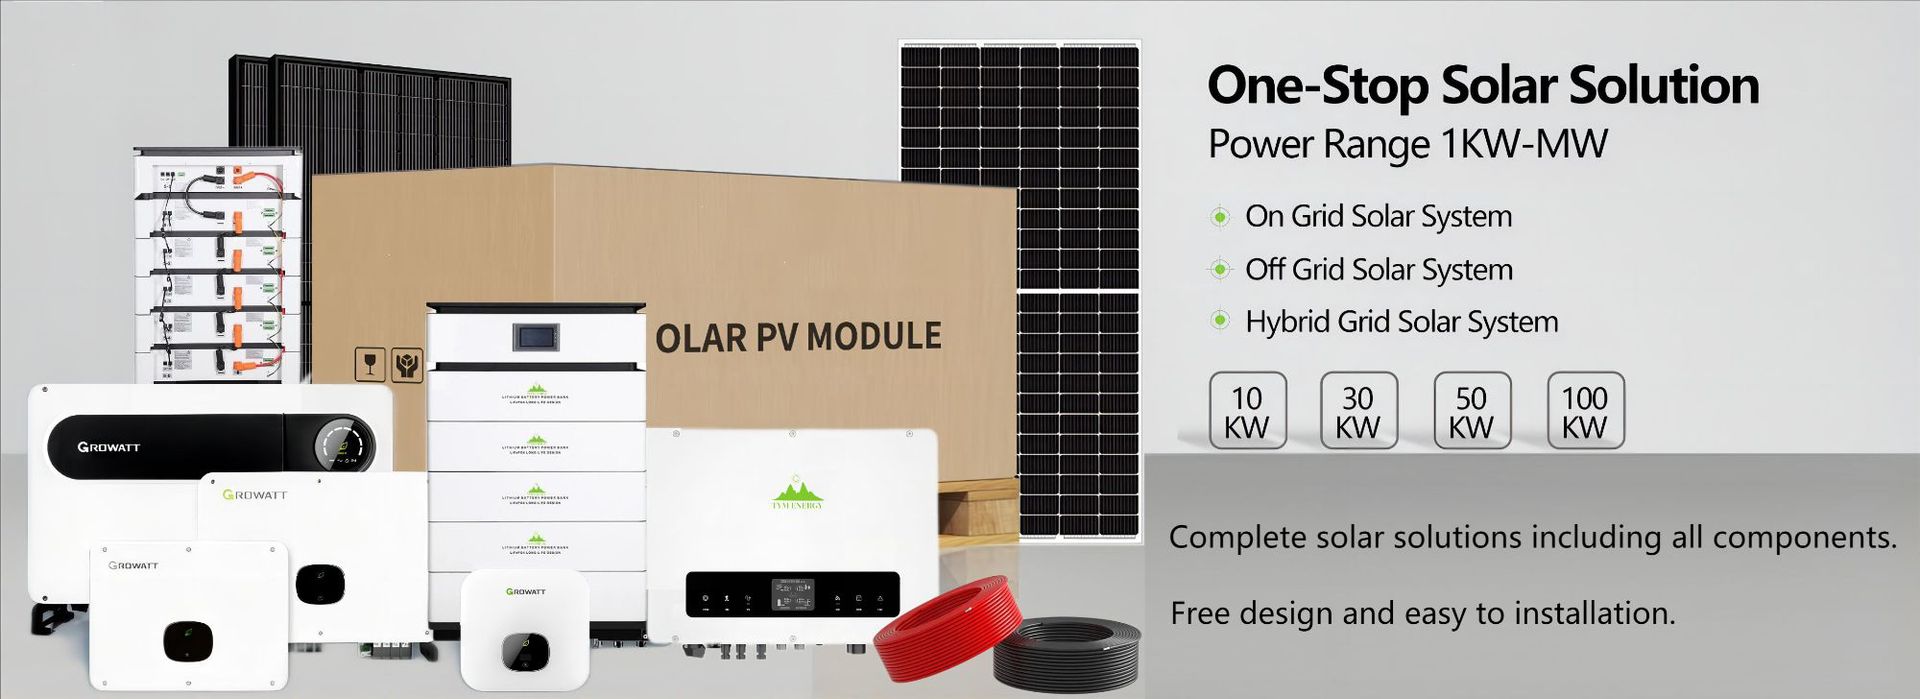 One-Stop Solar Solution